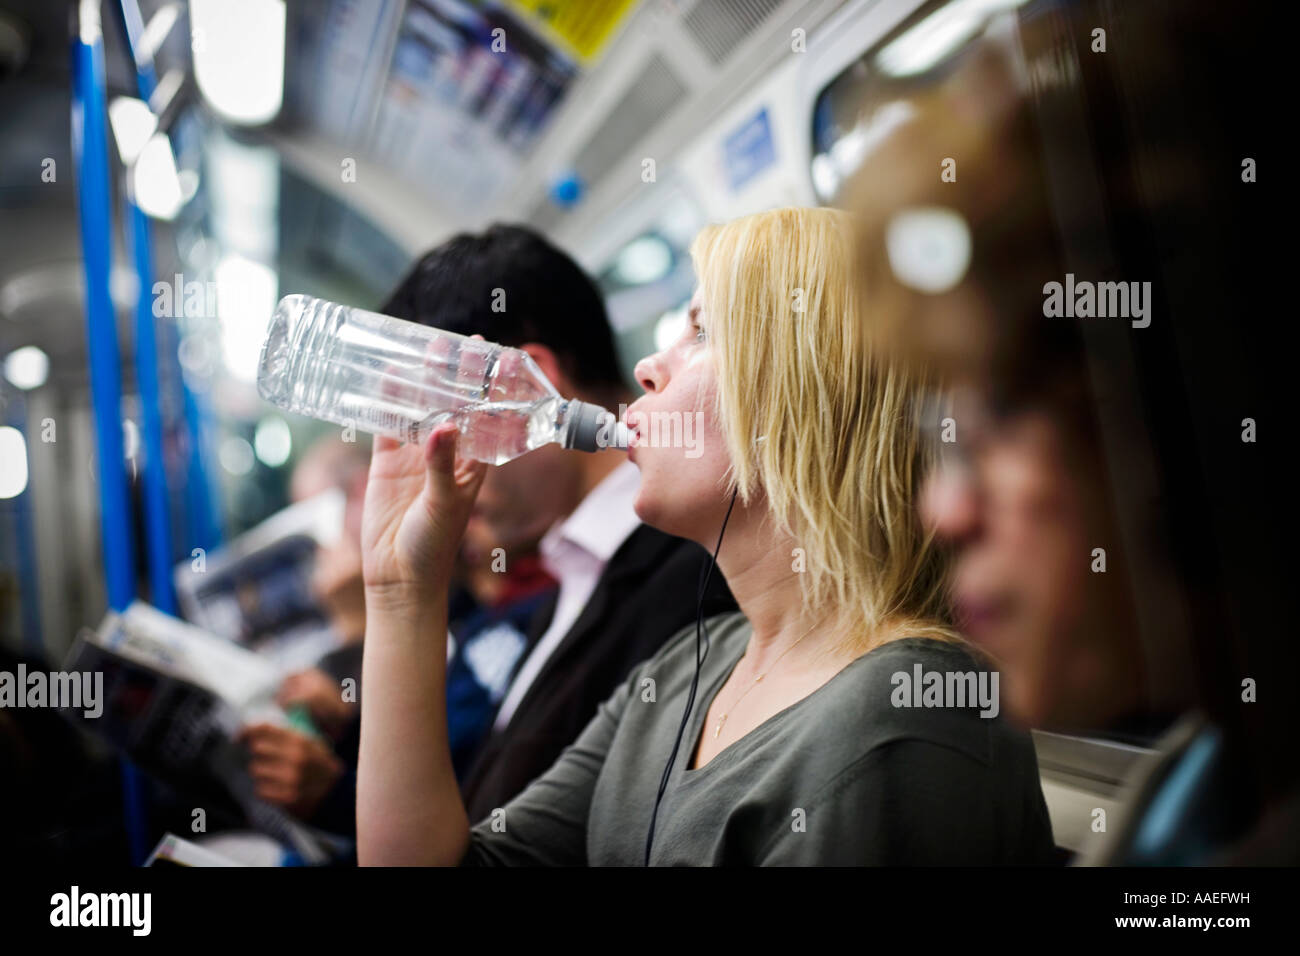 Woman on tube train takes a drink of water during sweltering conditions Stock Photo